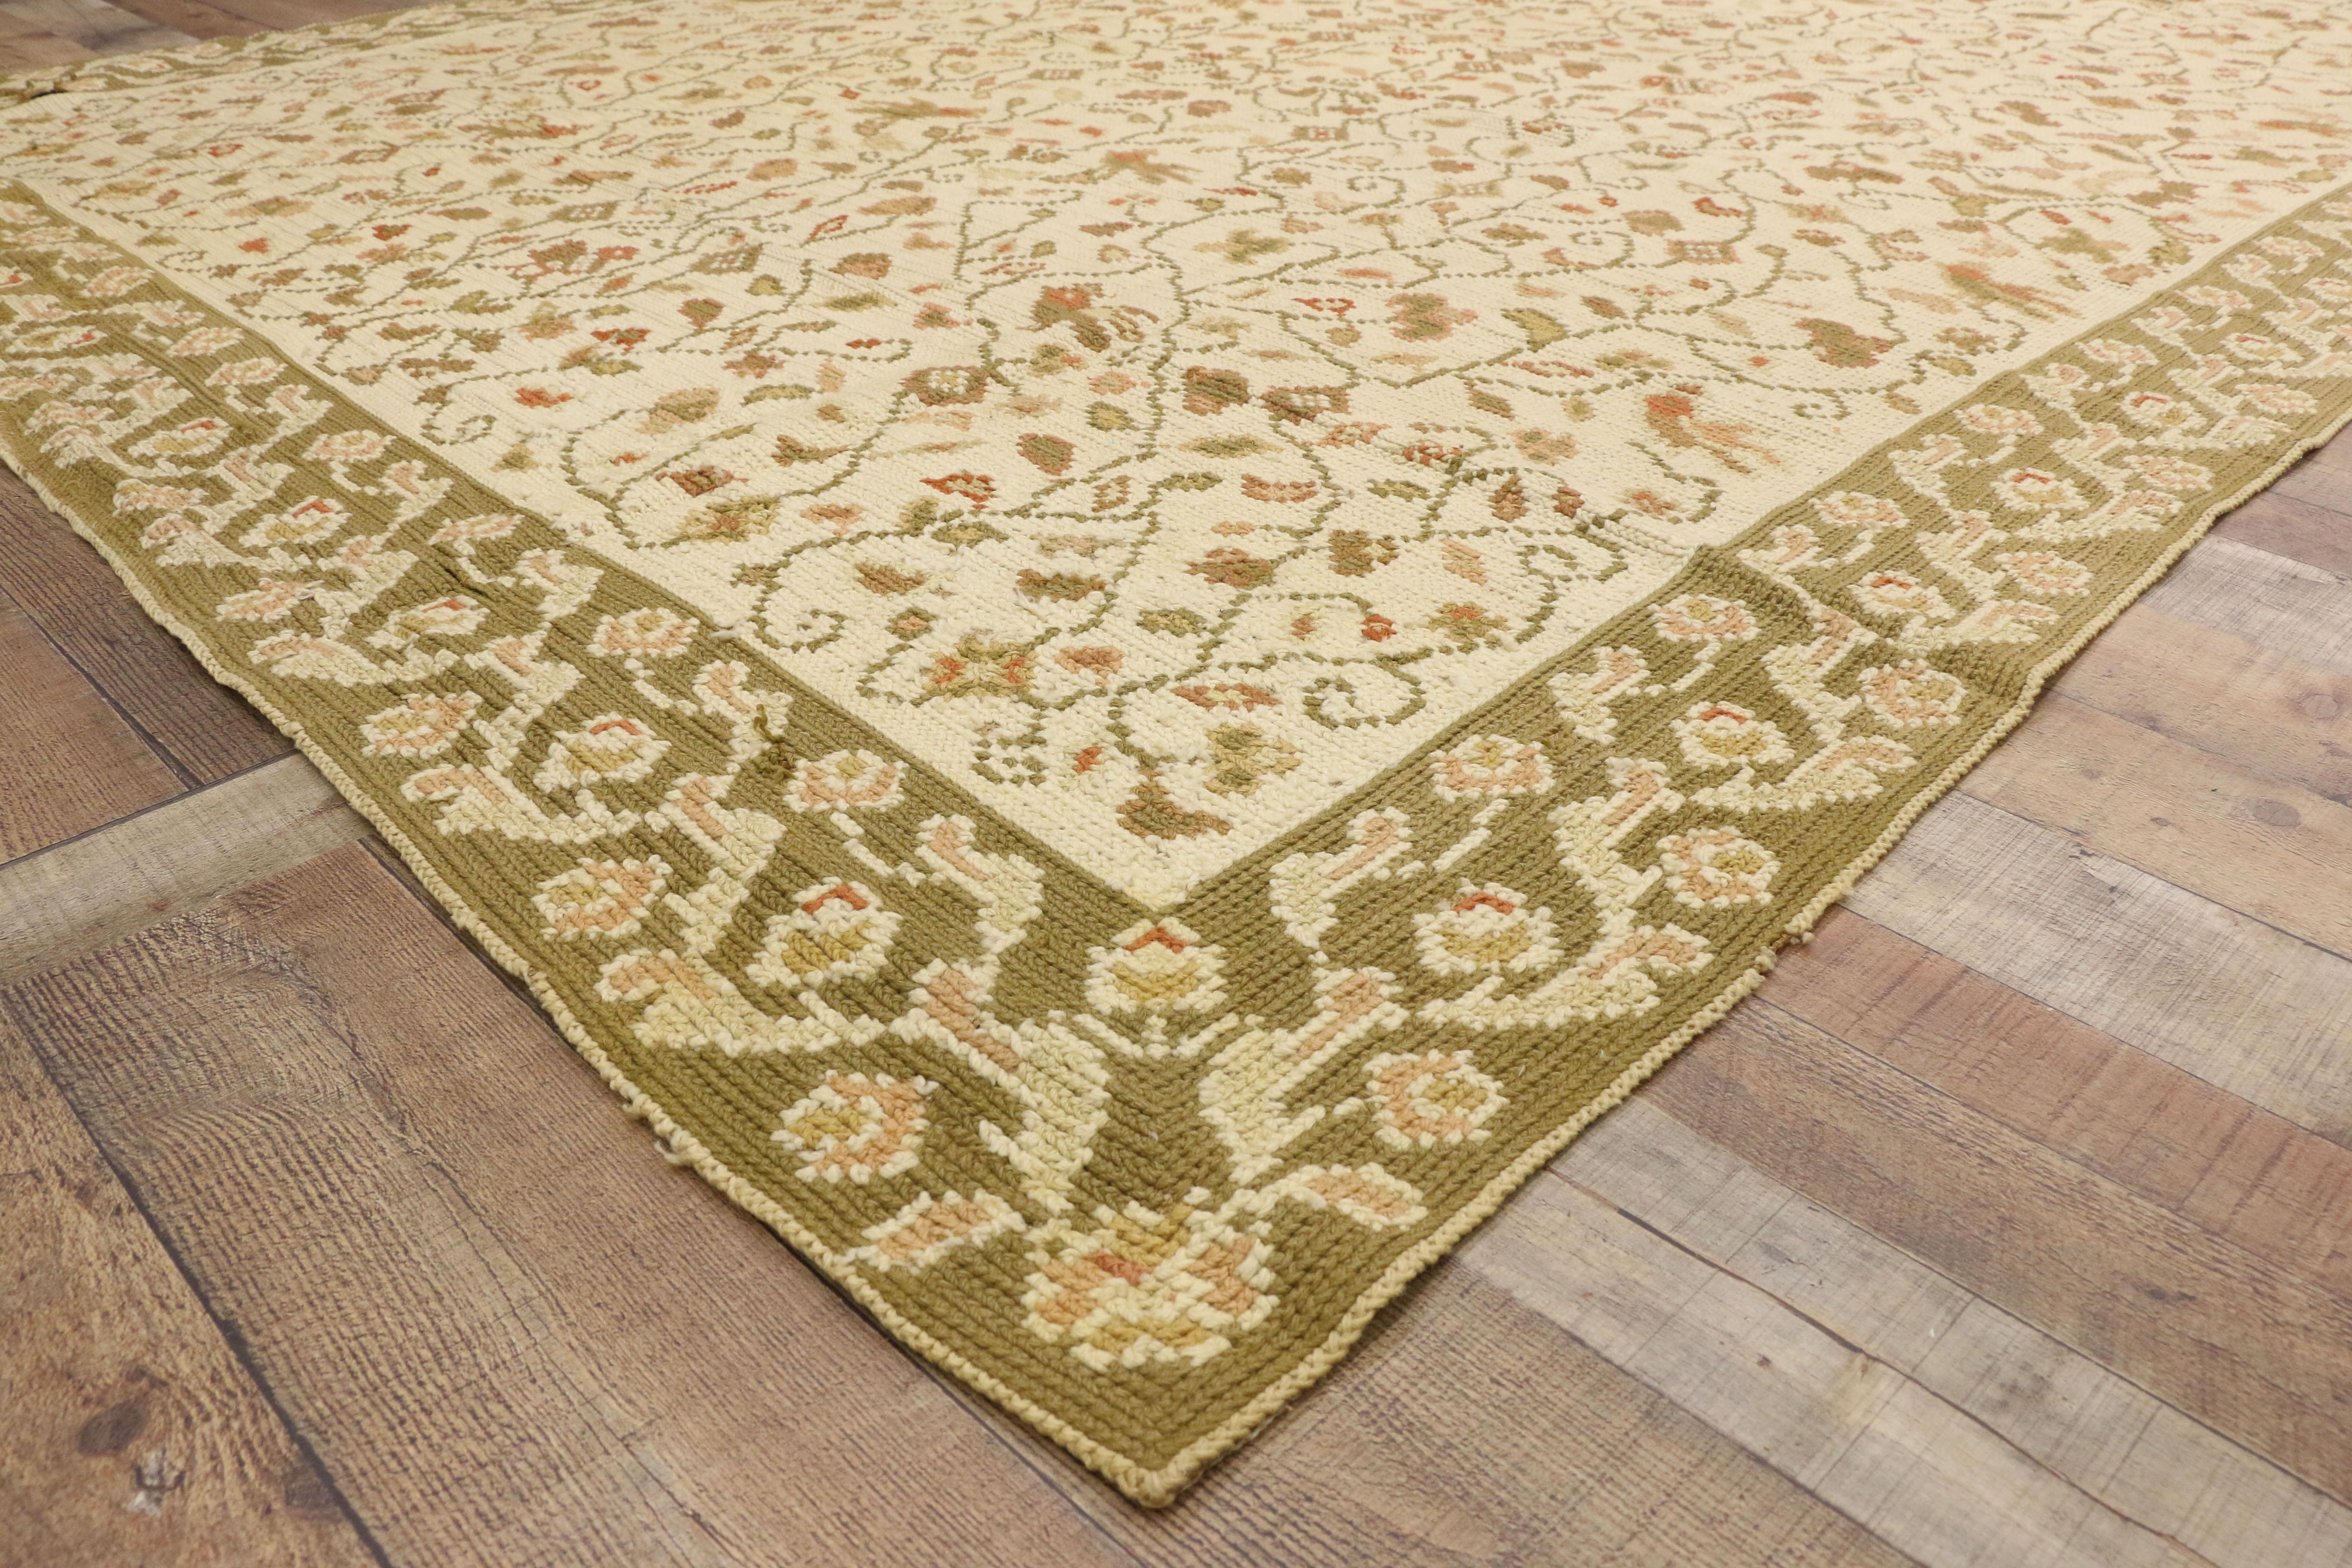 77210, antique Arraiolos rug with European Country Charm, Portuguese needlepoint rug. This daintily needlepoint antique Arraiolos rug features an all-over pattern of tiny florals amidst a flurry of leafy tendrils. The tendrils form a rapturing